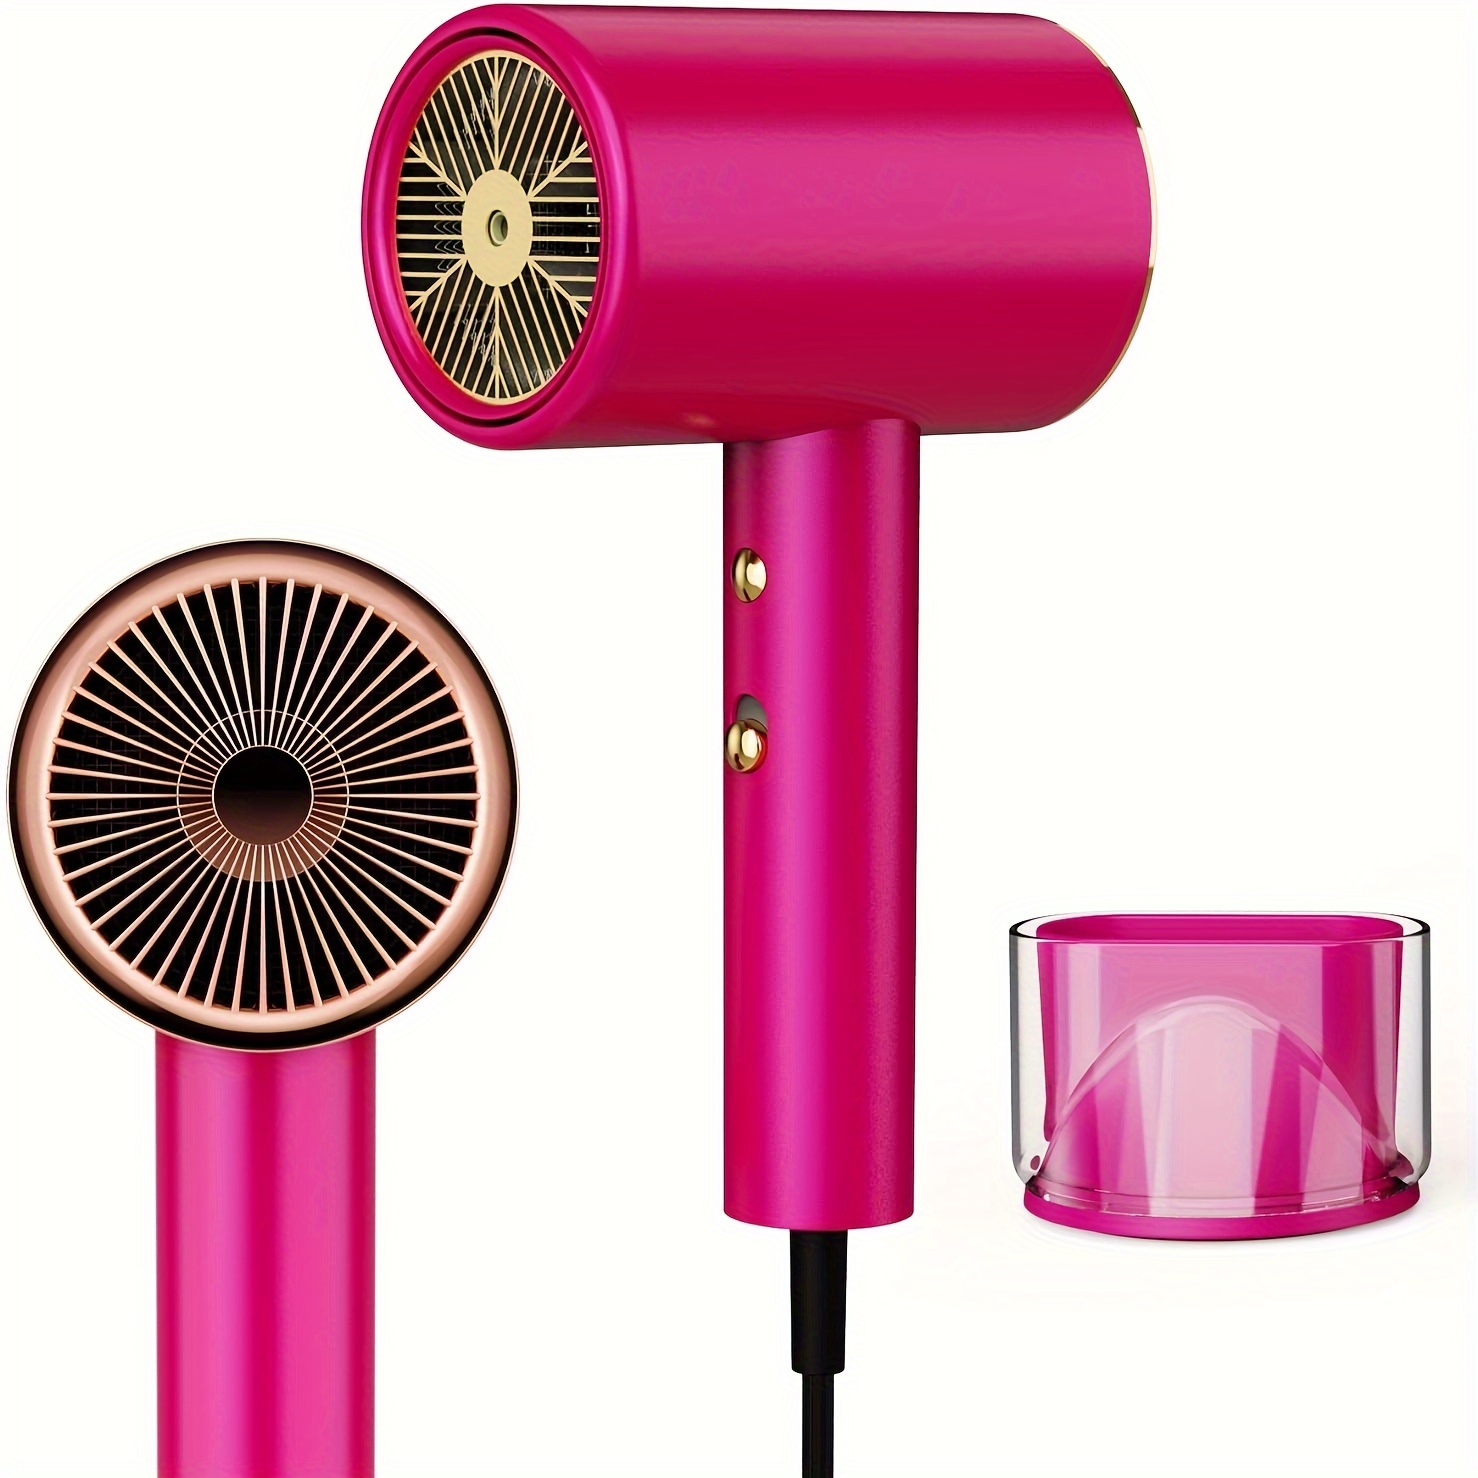 

Water Ionic Hair Dryer 1800w Travel Hair Dryer With Magnetic Nozzle, 2 Speed And 3 Heat Settings, Low Noise Fast Drying Hair Dryer For Home, Travel, Mother's Day Gift